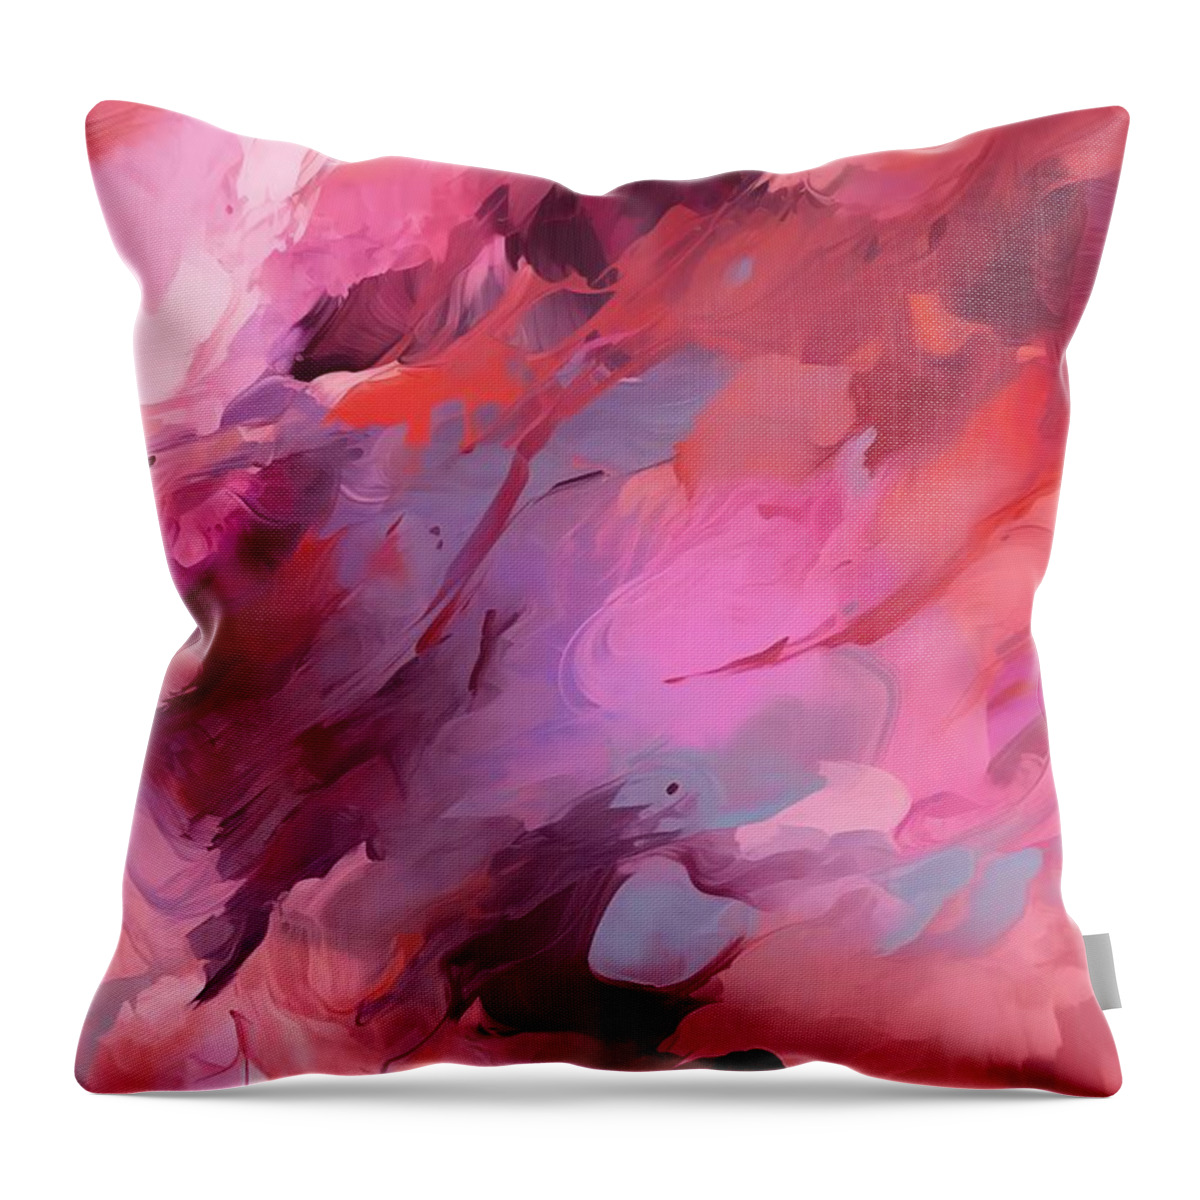 Pink Throw Pillow featuring the digital art Rosy Skies by Caito Junqueira